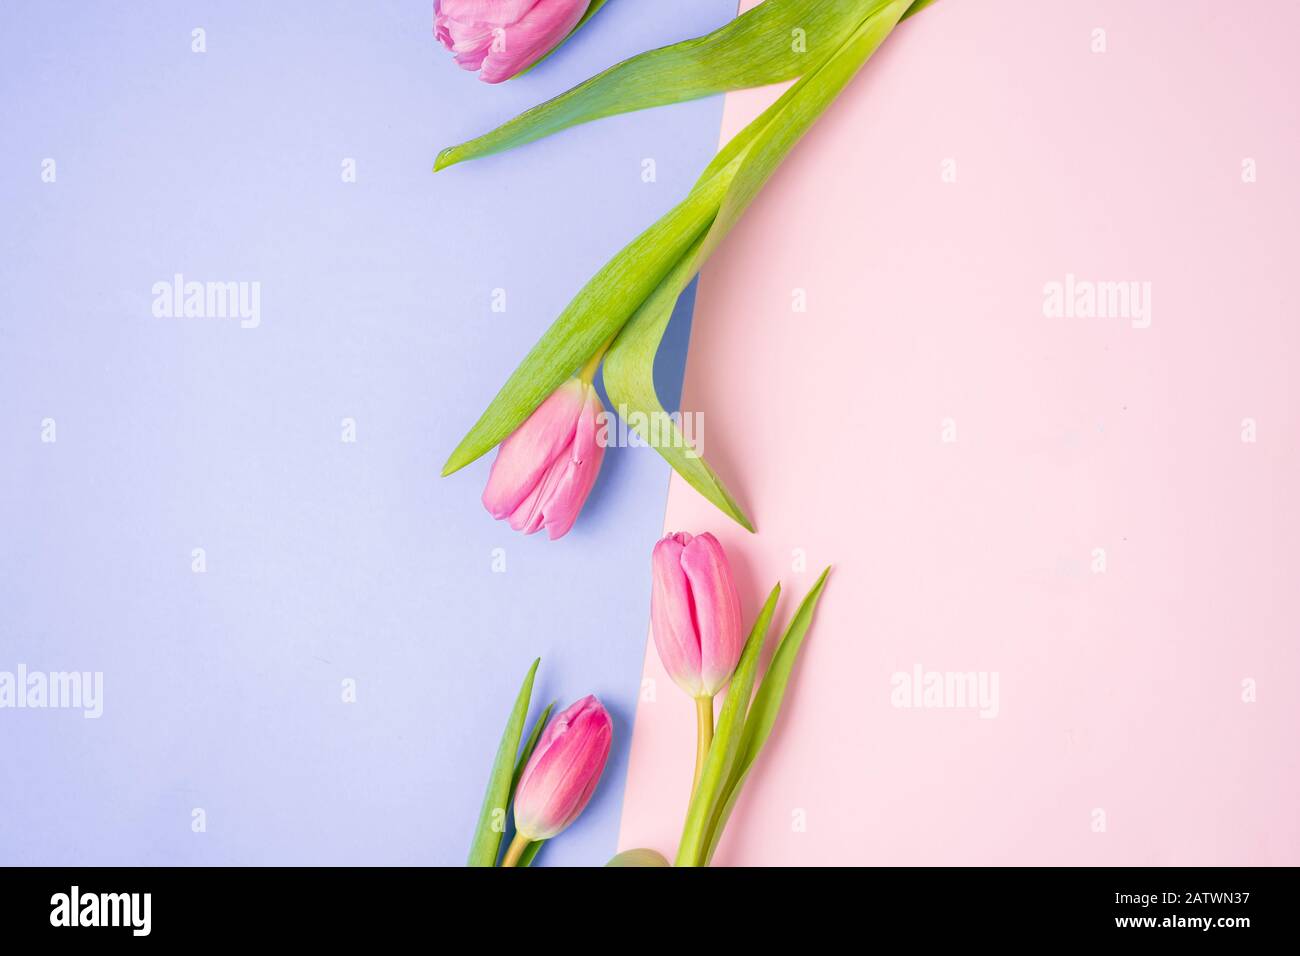 Closeup beautiful two tone blue and pink paper spring background with flowers tulips for copy space for text Stock Photo